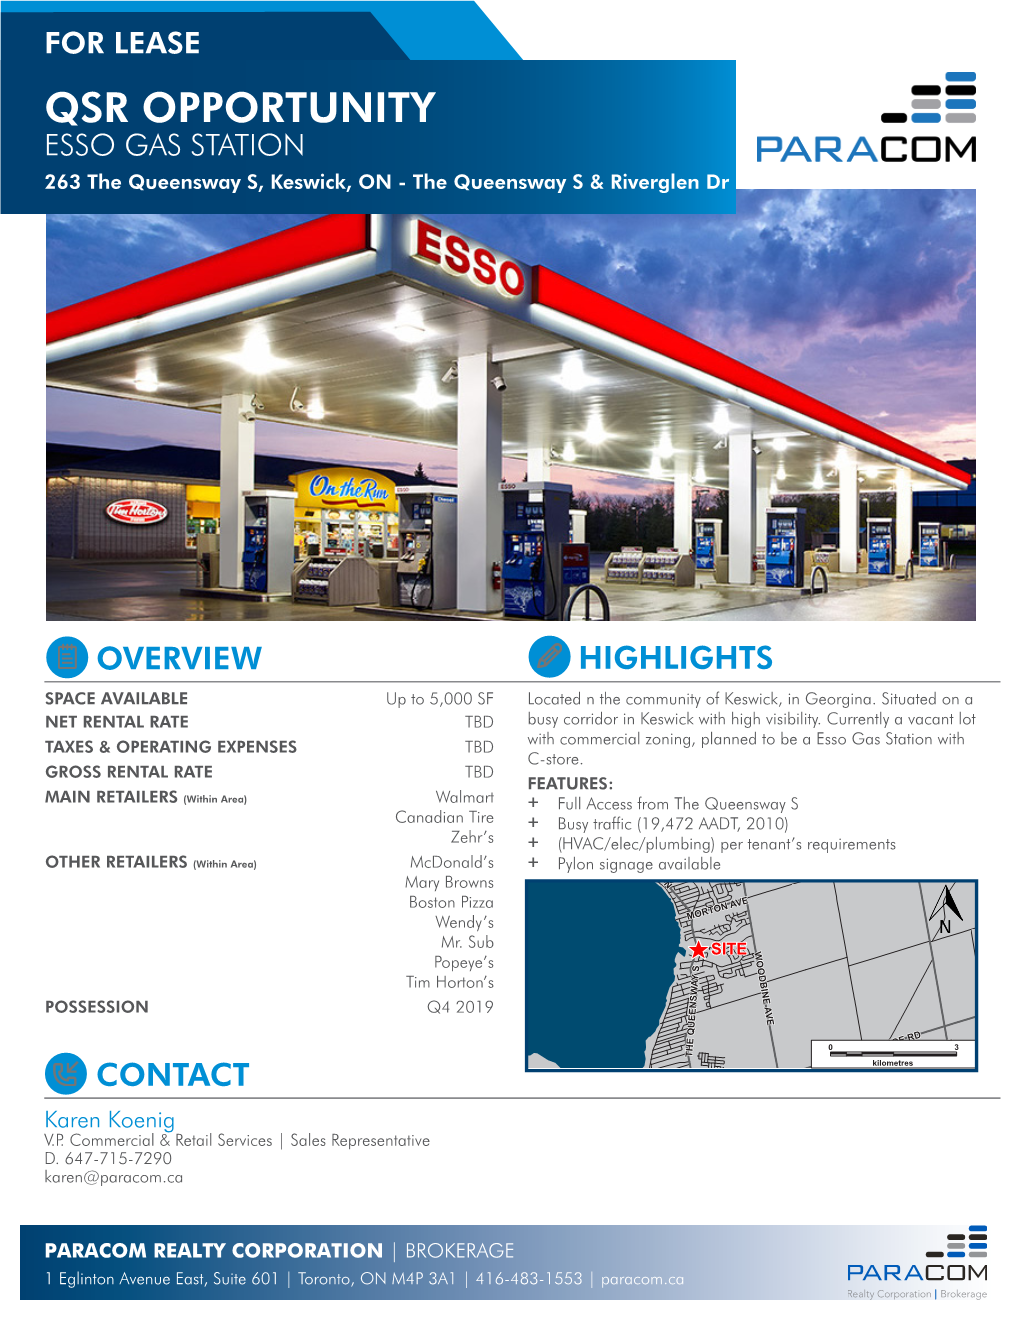 QSR OPPORTUNITY ESSO GAS STATION 263 the Queensway S, Keswick, on - the Queensway S & Riverglen Dr